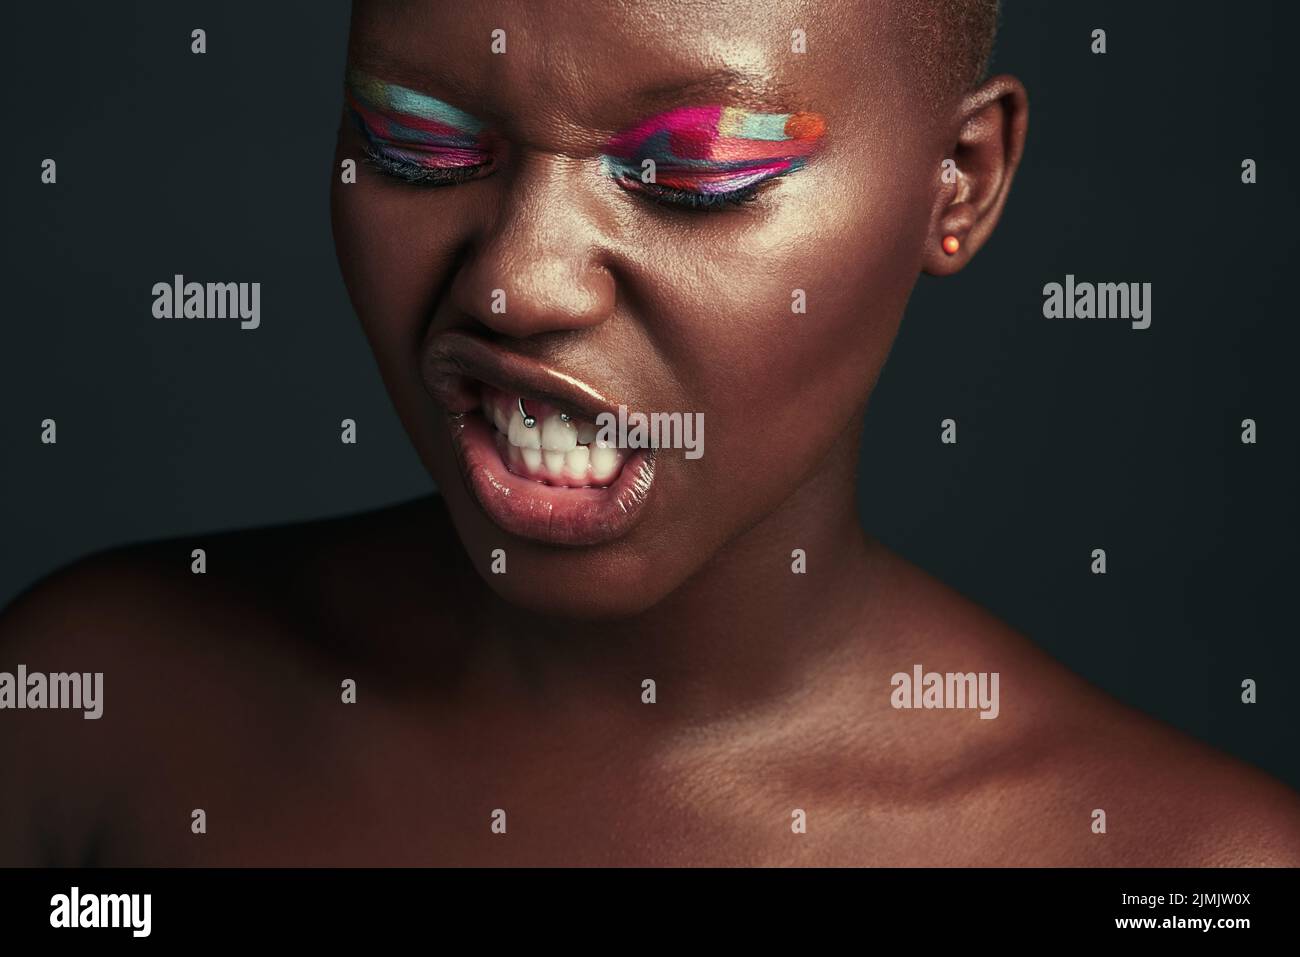 Be a badass and wear that daring eyeshadow. a beautiful woman wearing colorful eyeshadow while posing against a grey background. Stock Photo